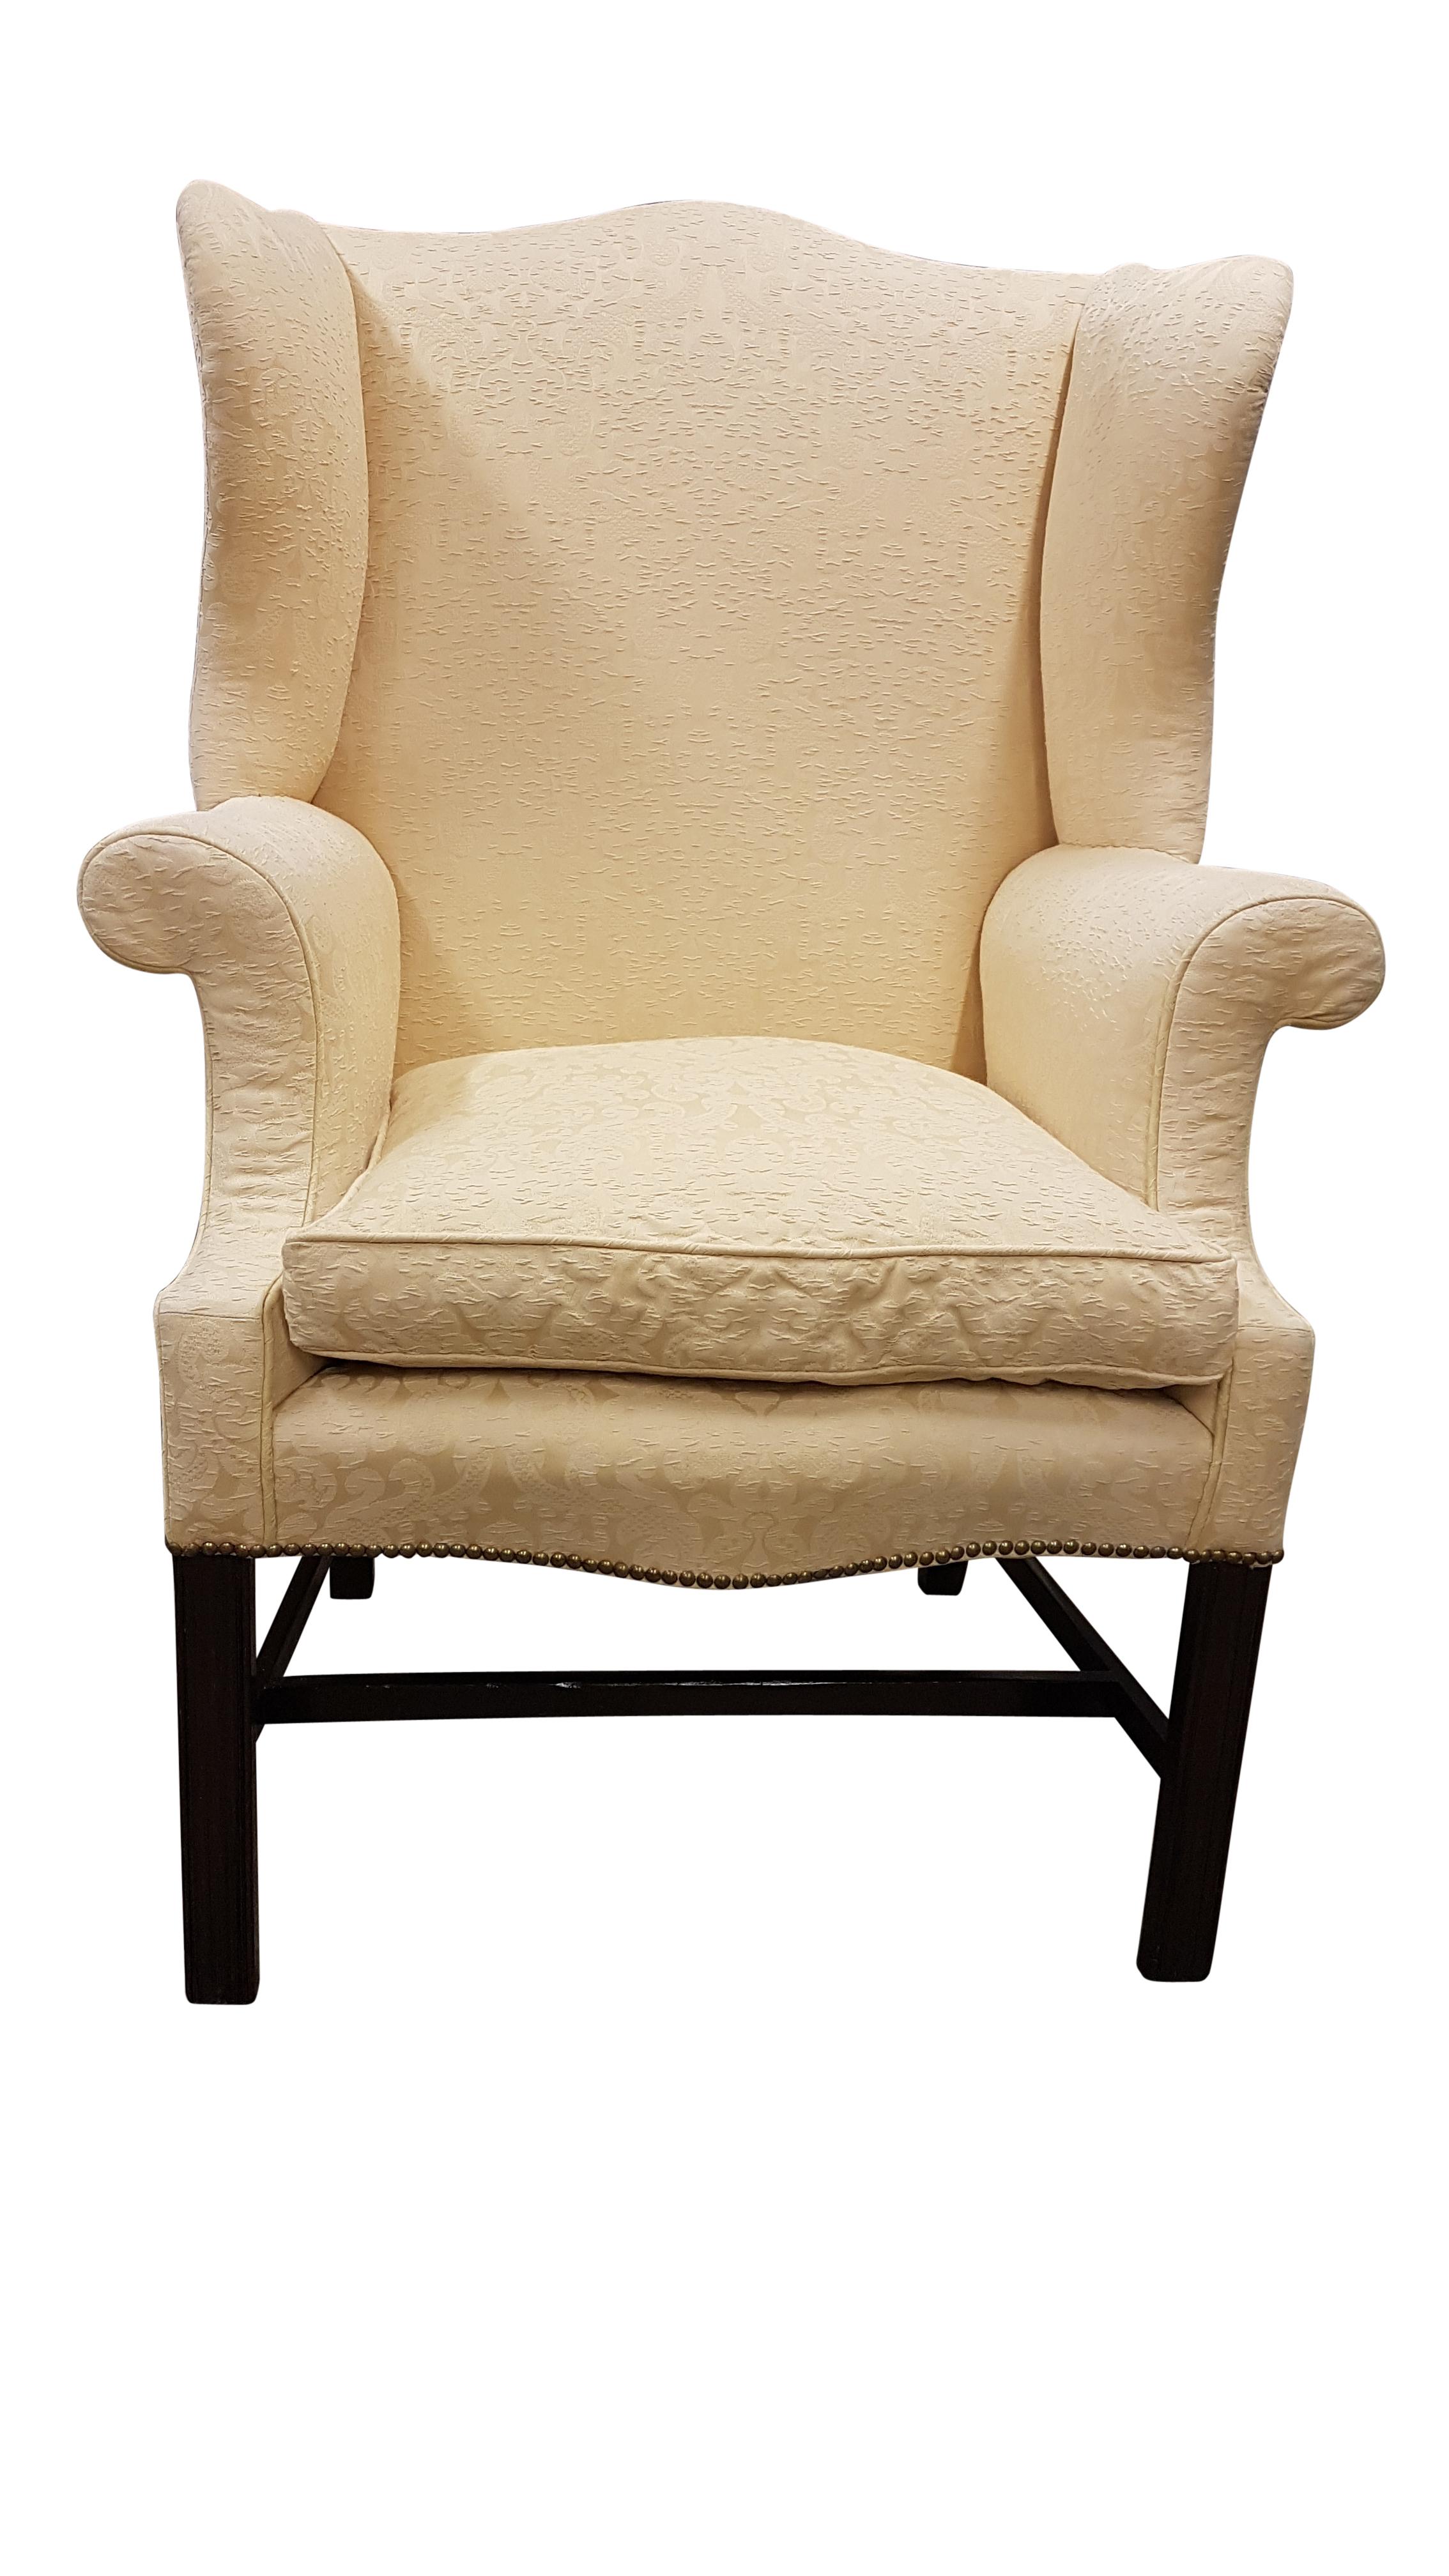 A grand and elegant early 20th century Chippendale revival camel topped wingback armchair with a serpentine front. This armchair is of a large scale so would comfortably fit a larger framed person. It has recently been fully reupholstered using high